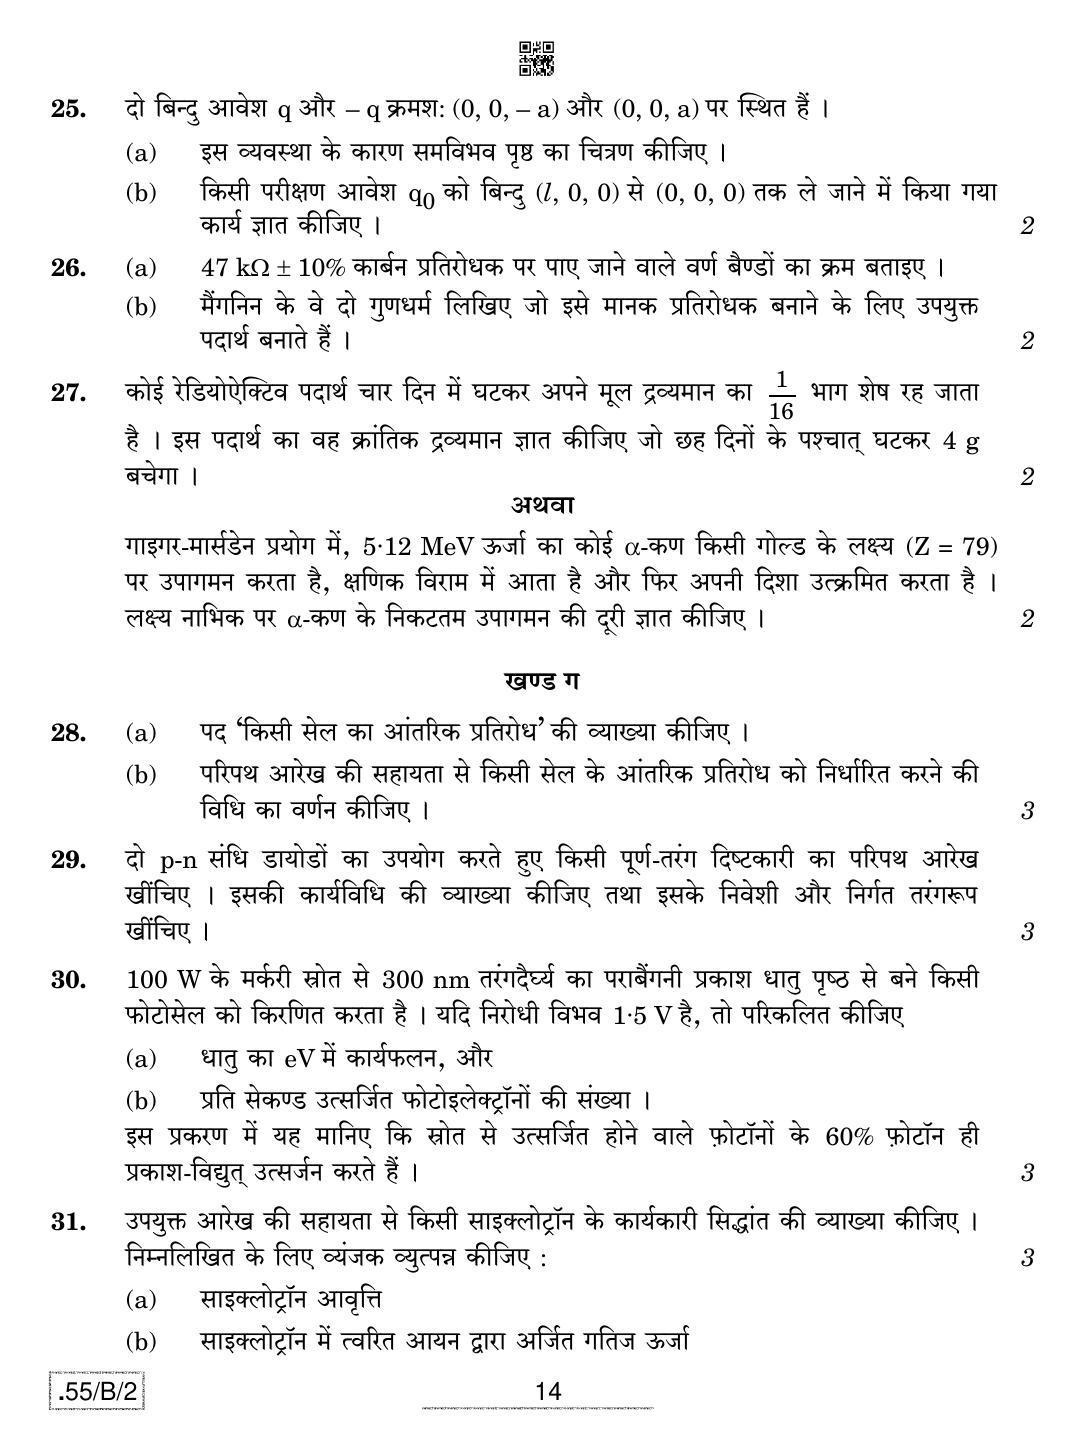 CBSE Class 12 55-C-2 - Physics 2020 Compartment Question Paper - Page 14